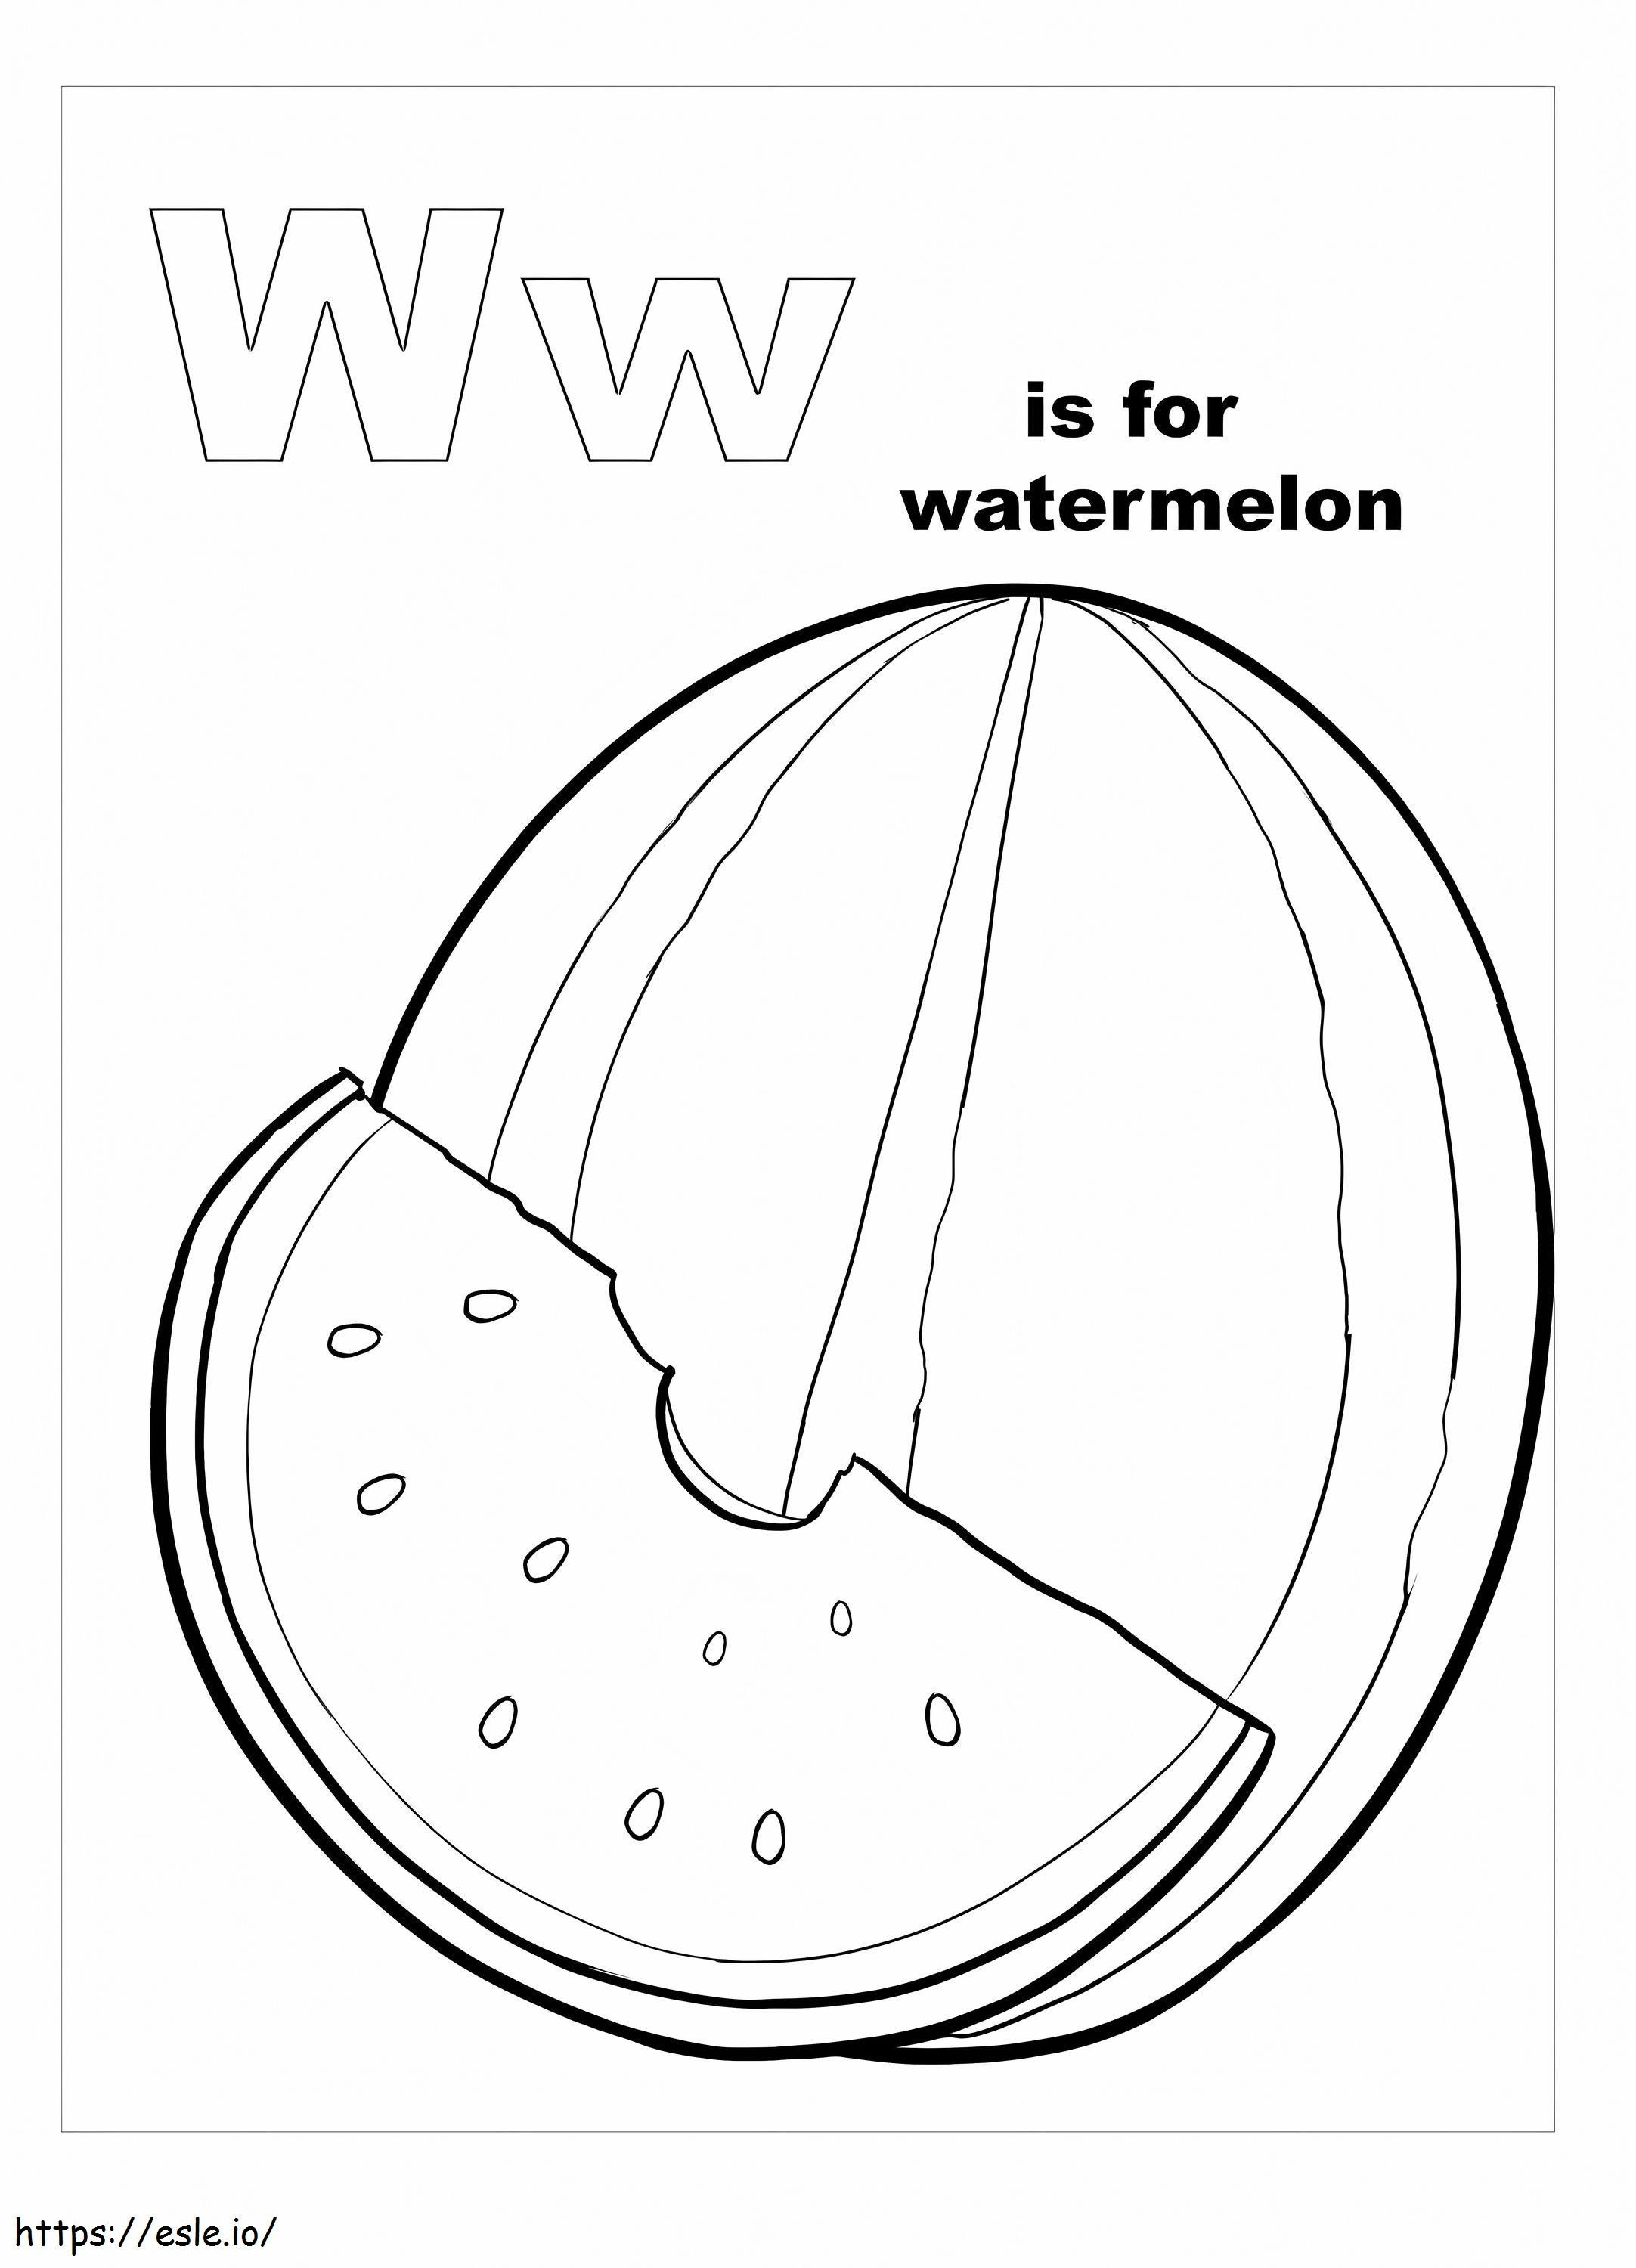 The Letter W Is For Watermelon coloring page